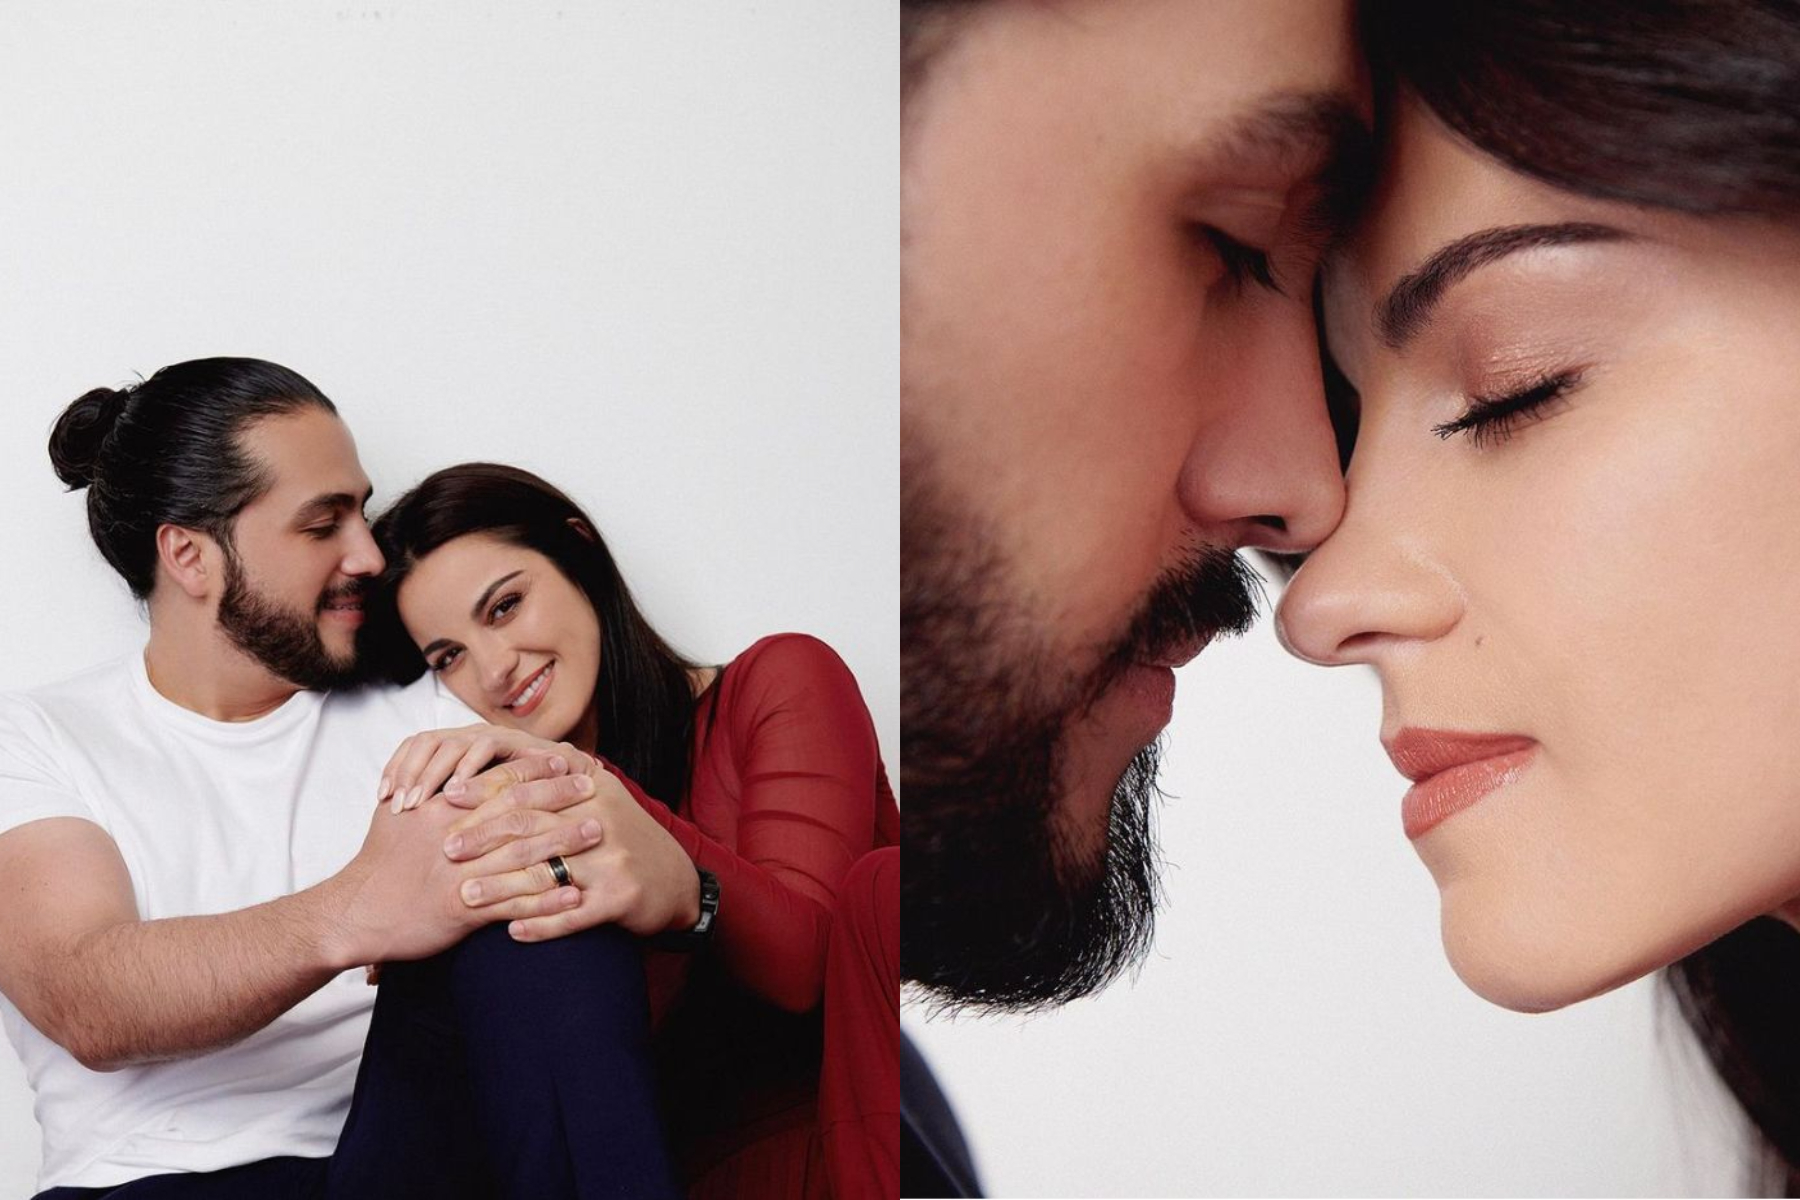 In 2021 they announced their courtship (Photo: Instagram: @Maiteperroni)